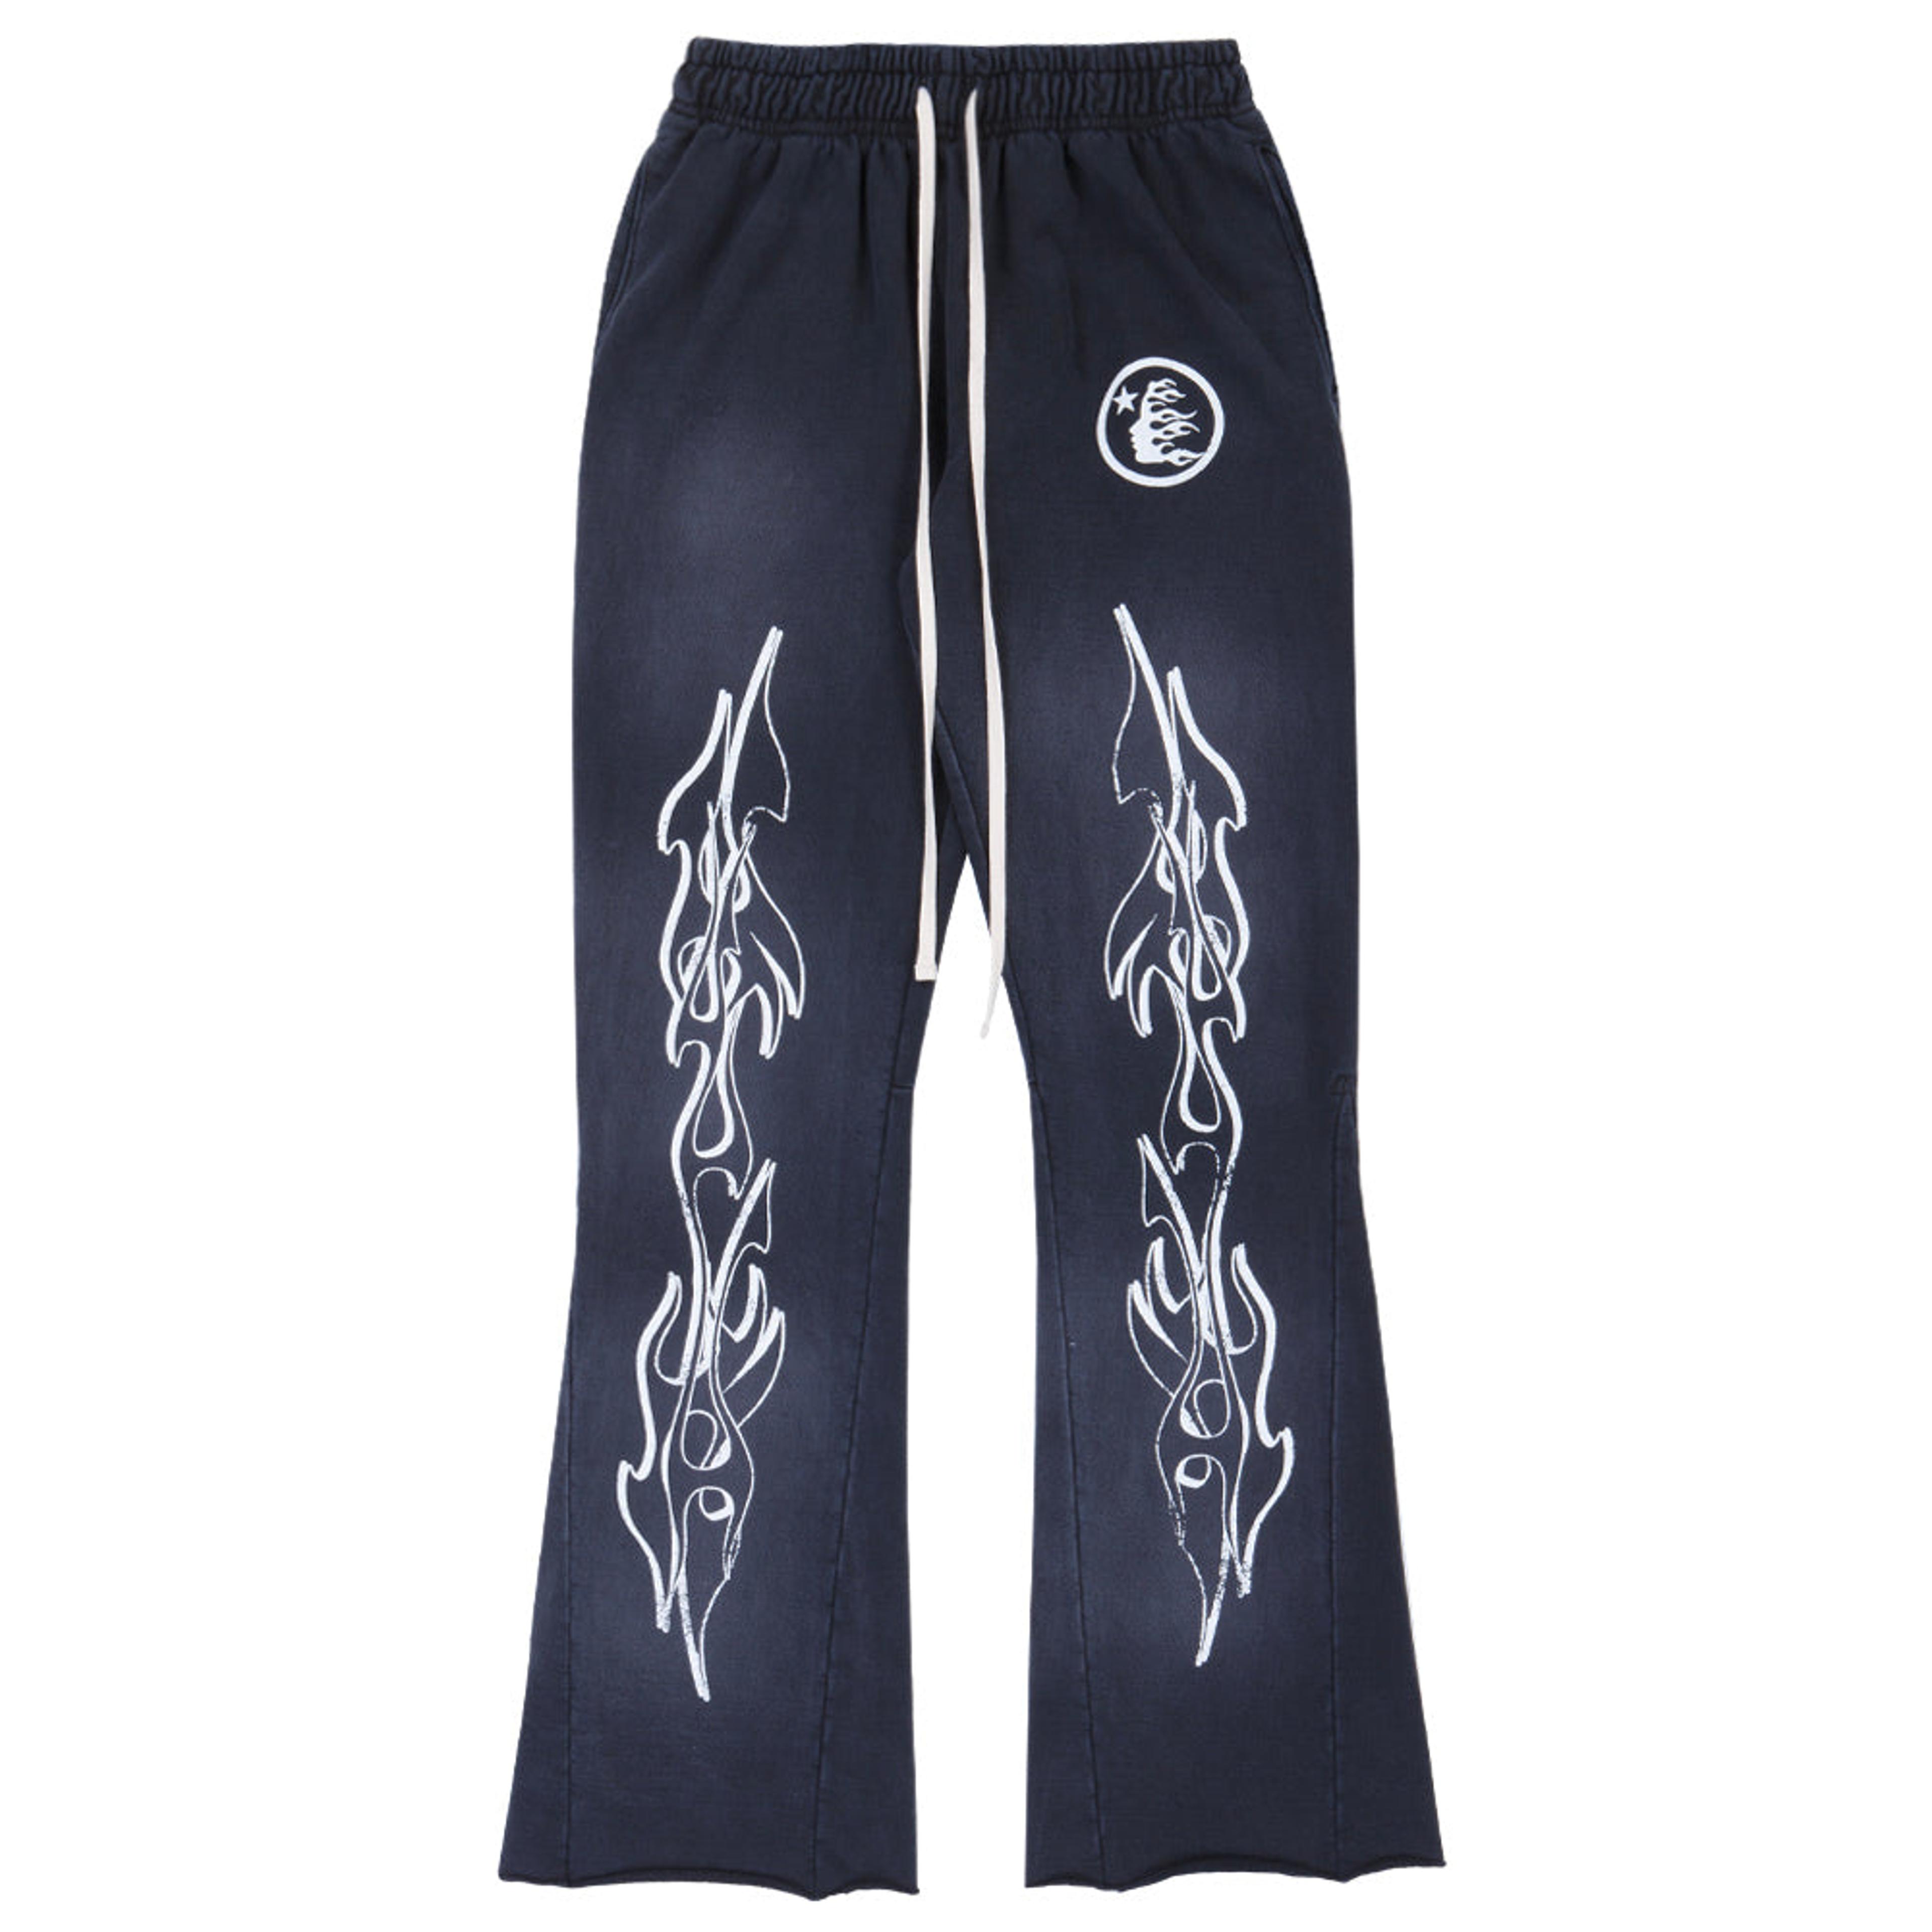 Hellstar Racer Path to Paradise Sweatpants Washed Black